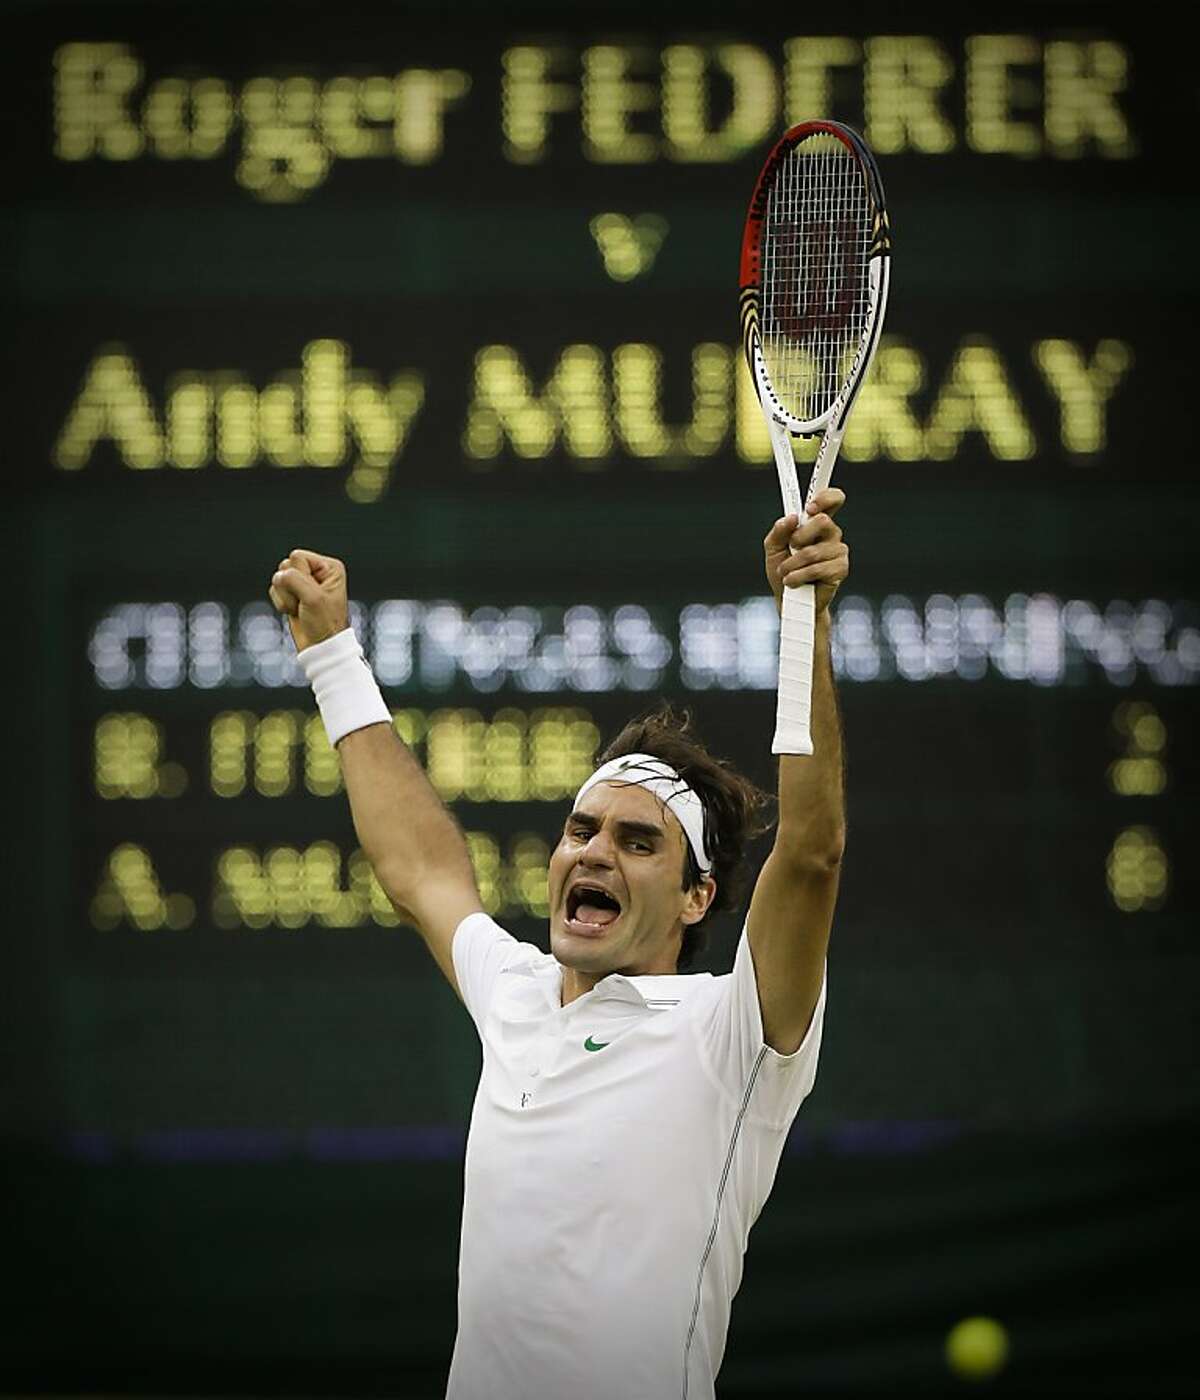 Roger Federer of Switzerland celebrates winning the men's singles final against Andy Murray of Britain at the All England Lawn Tennis Championships at Wimbledon, England, Sunday, July 8, 2012. (AP Photo/Anja Niedringhaus)